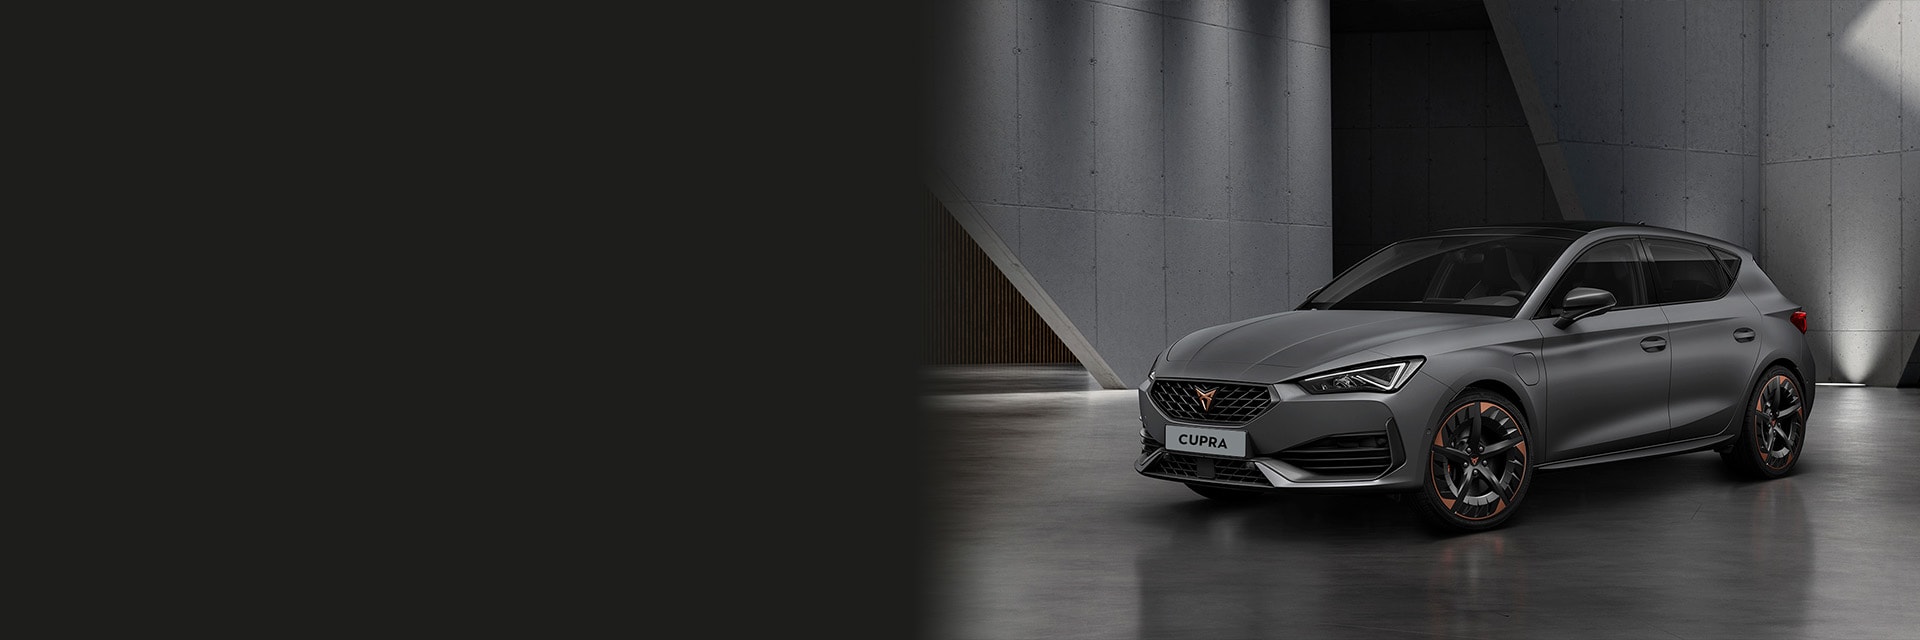 Lifestyle CUPRA Leon front and side facing image.